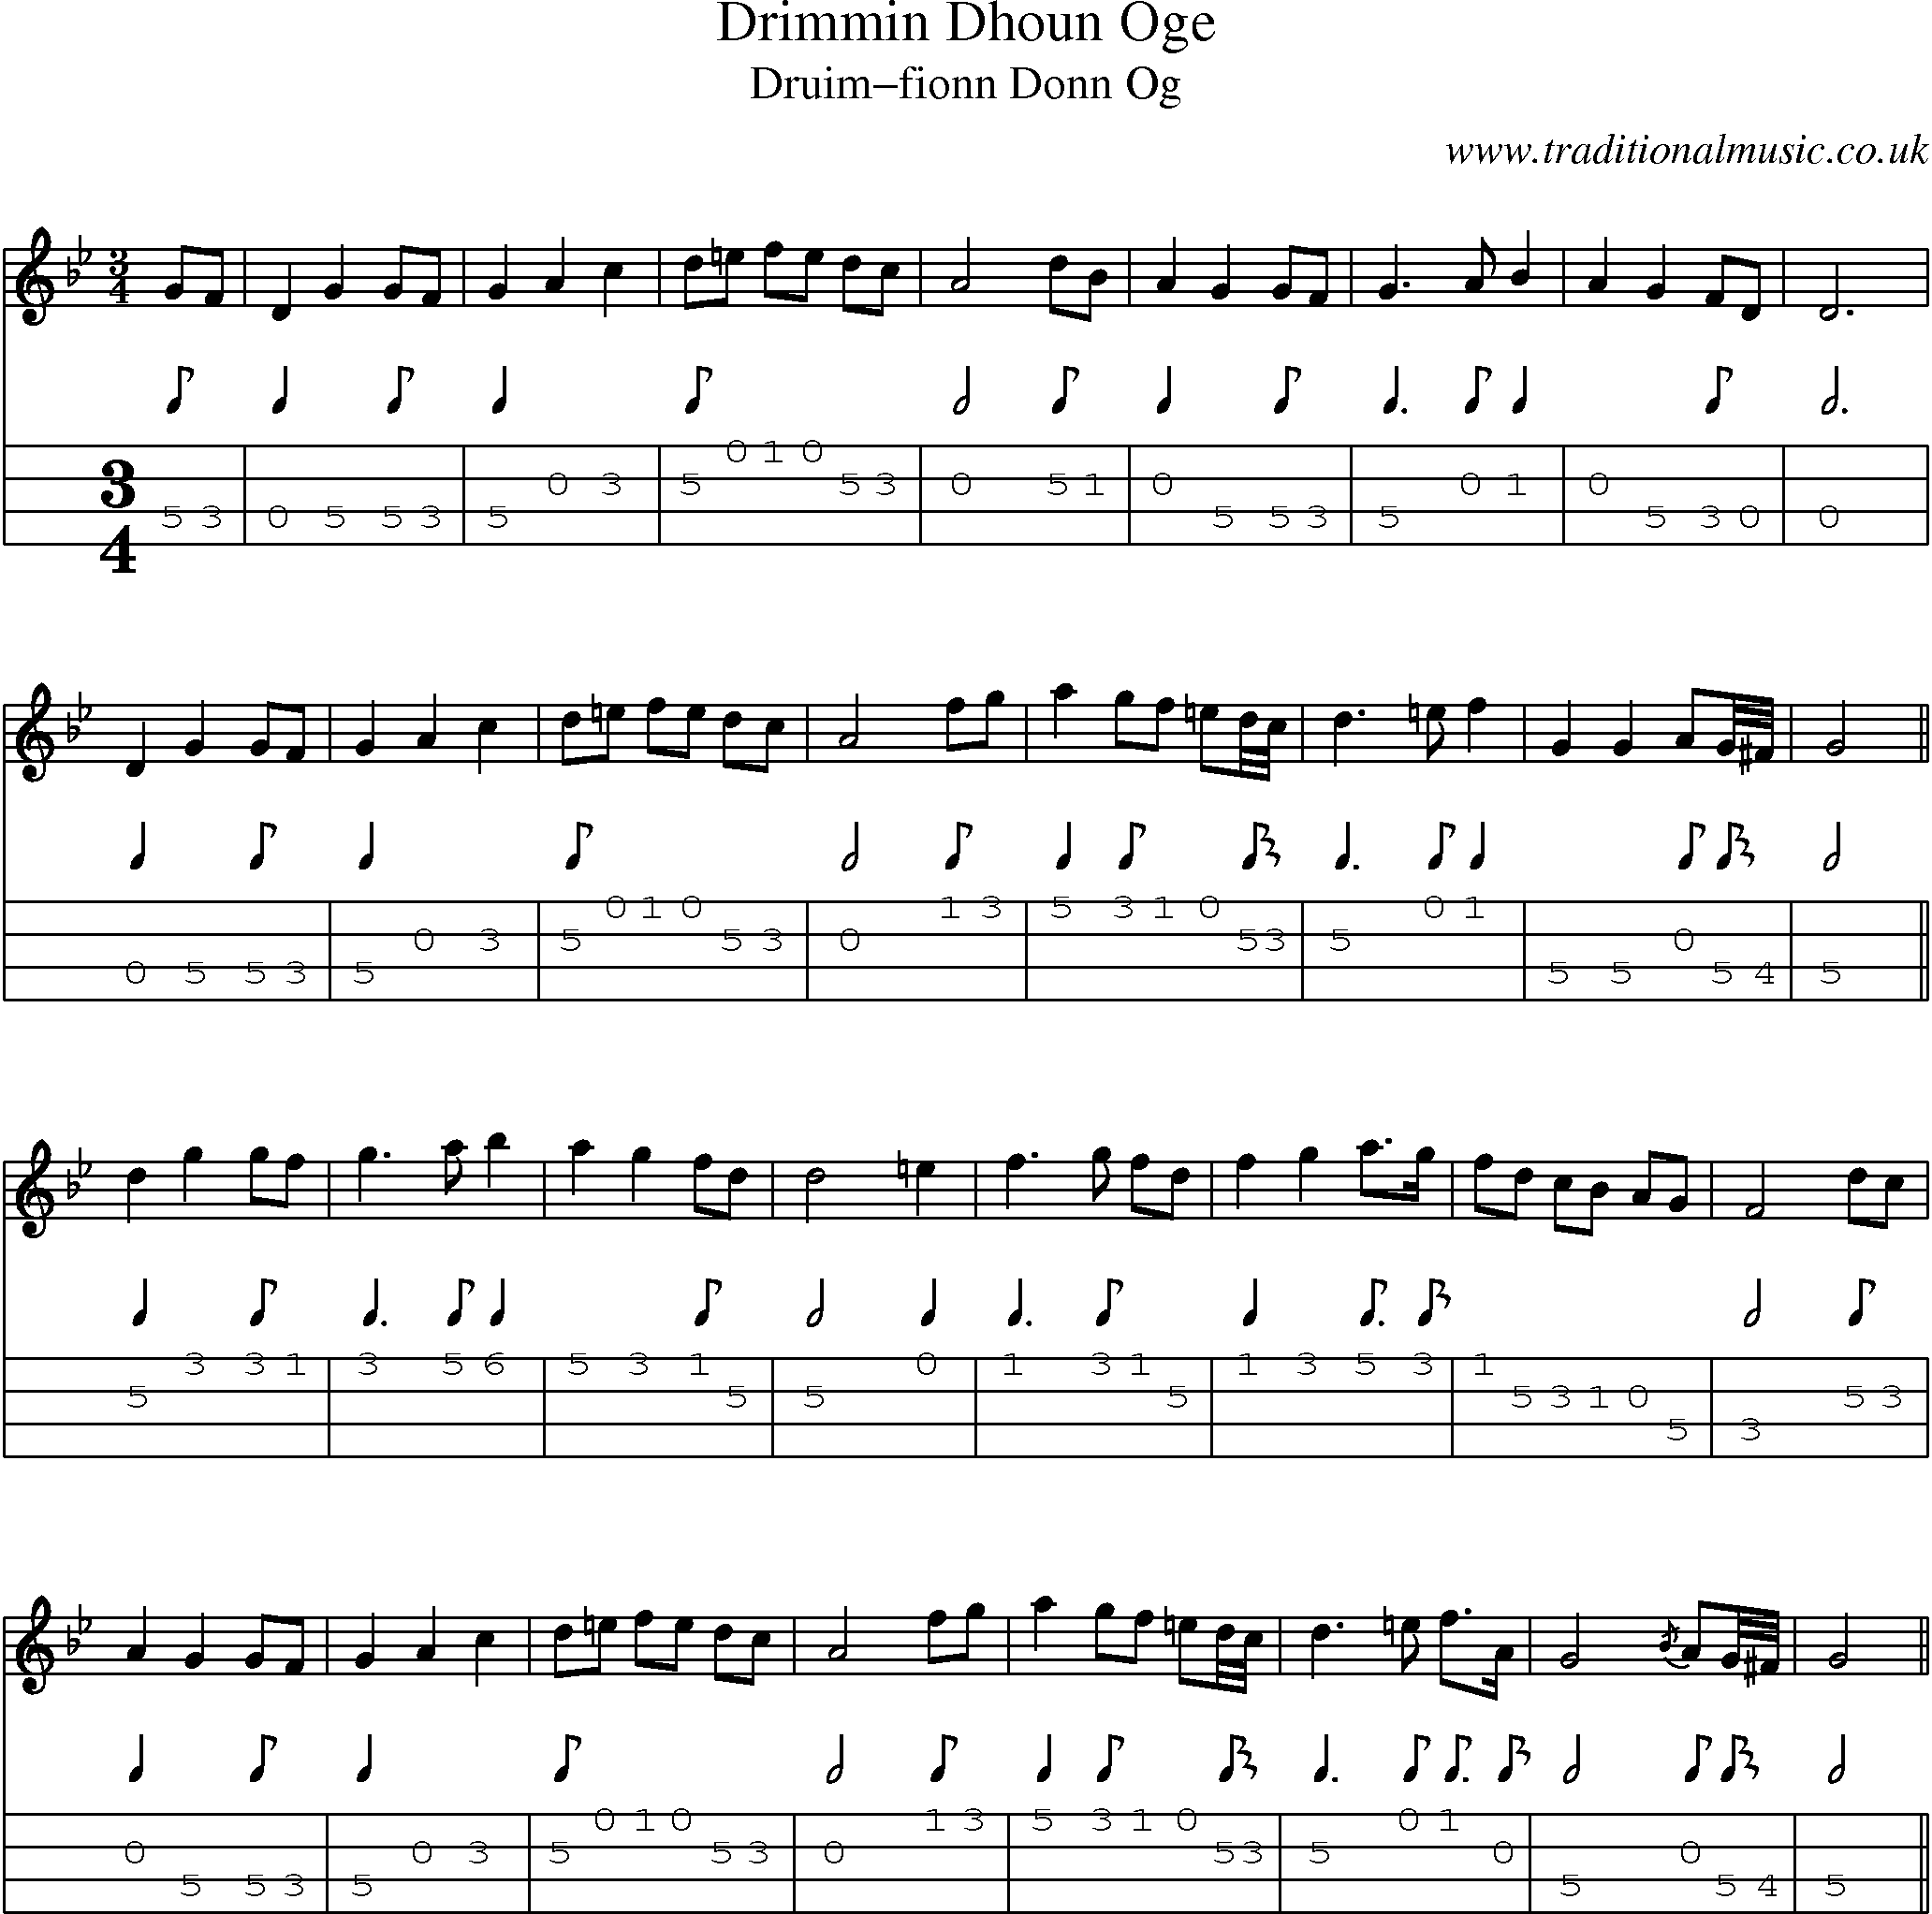 Music Score and Mandolin Tabs for Drimmin Dhoun Oge